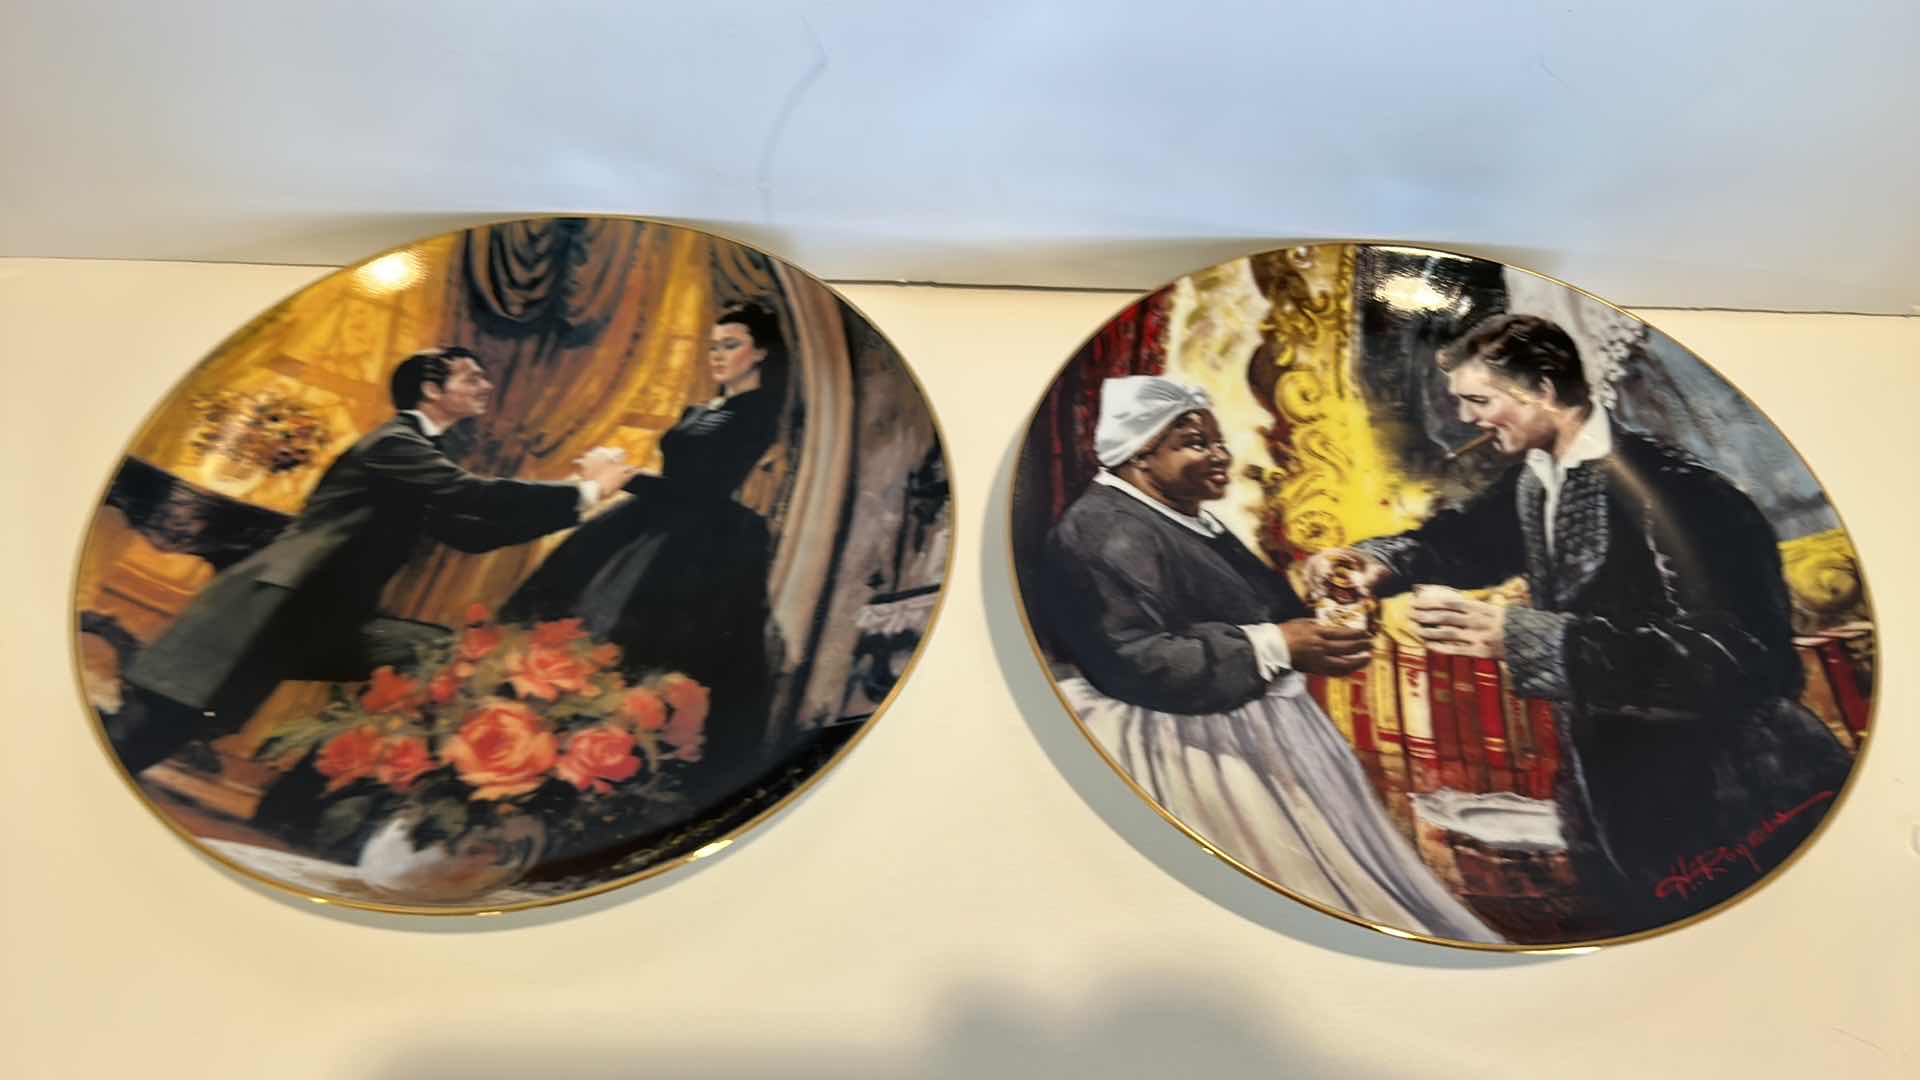 Photo 1 of 2 - COLLECTIBLE FINE CHINA “GONE WITH THE WIND” GOLDEN ANNIVERSARY SERIES BY W.L. GEORGE NUMBERED PLATES 8.5”